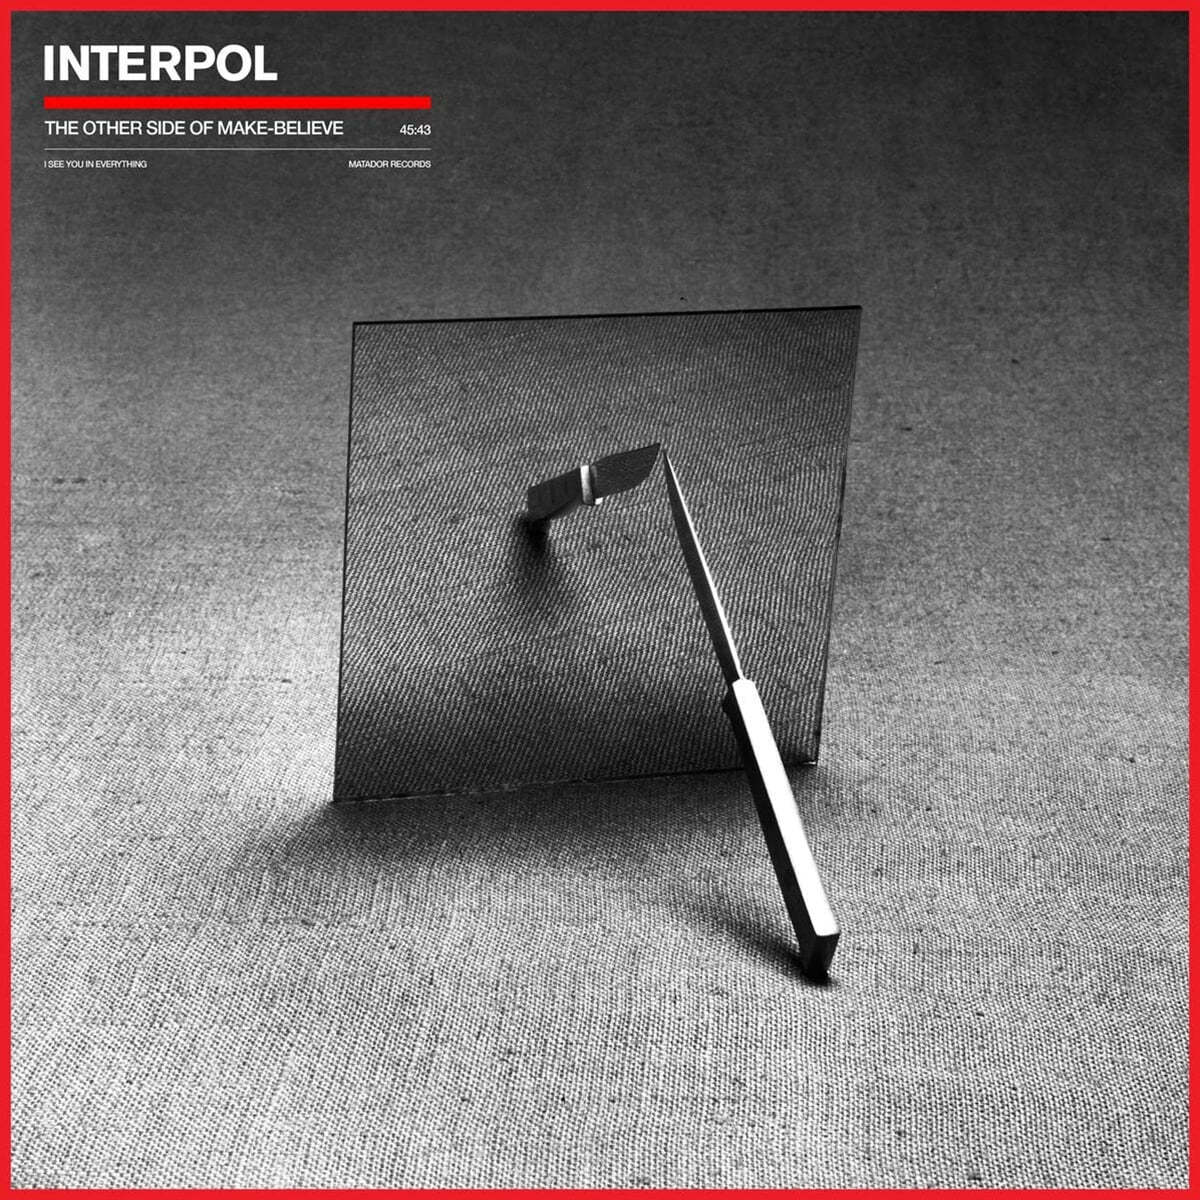 Interpol (인터폴) - 7집 The Other Side Of Make Believe [레드 컬러 LP]